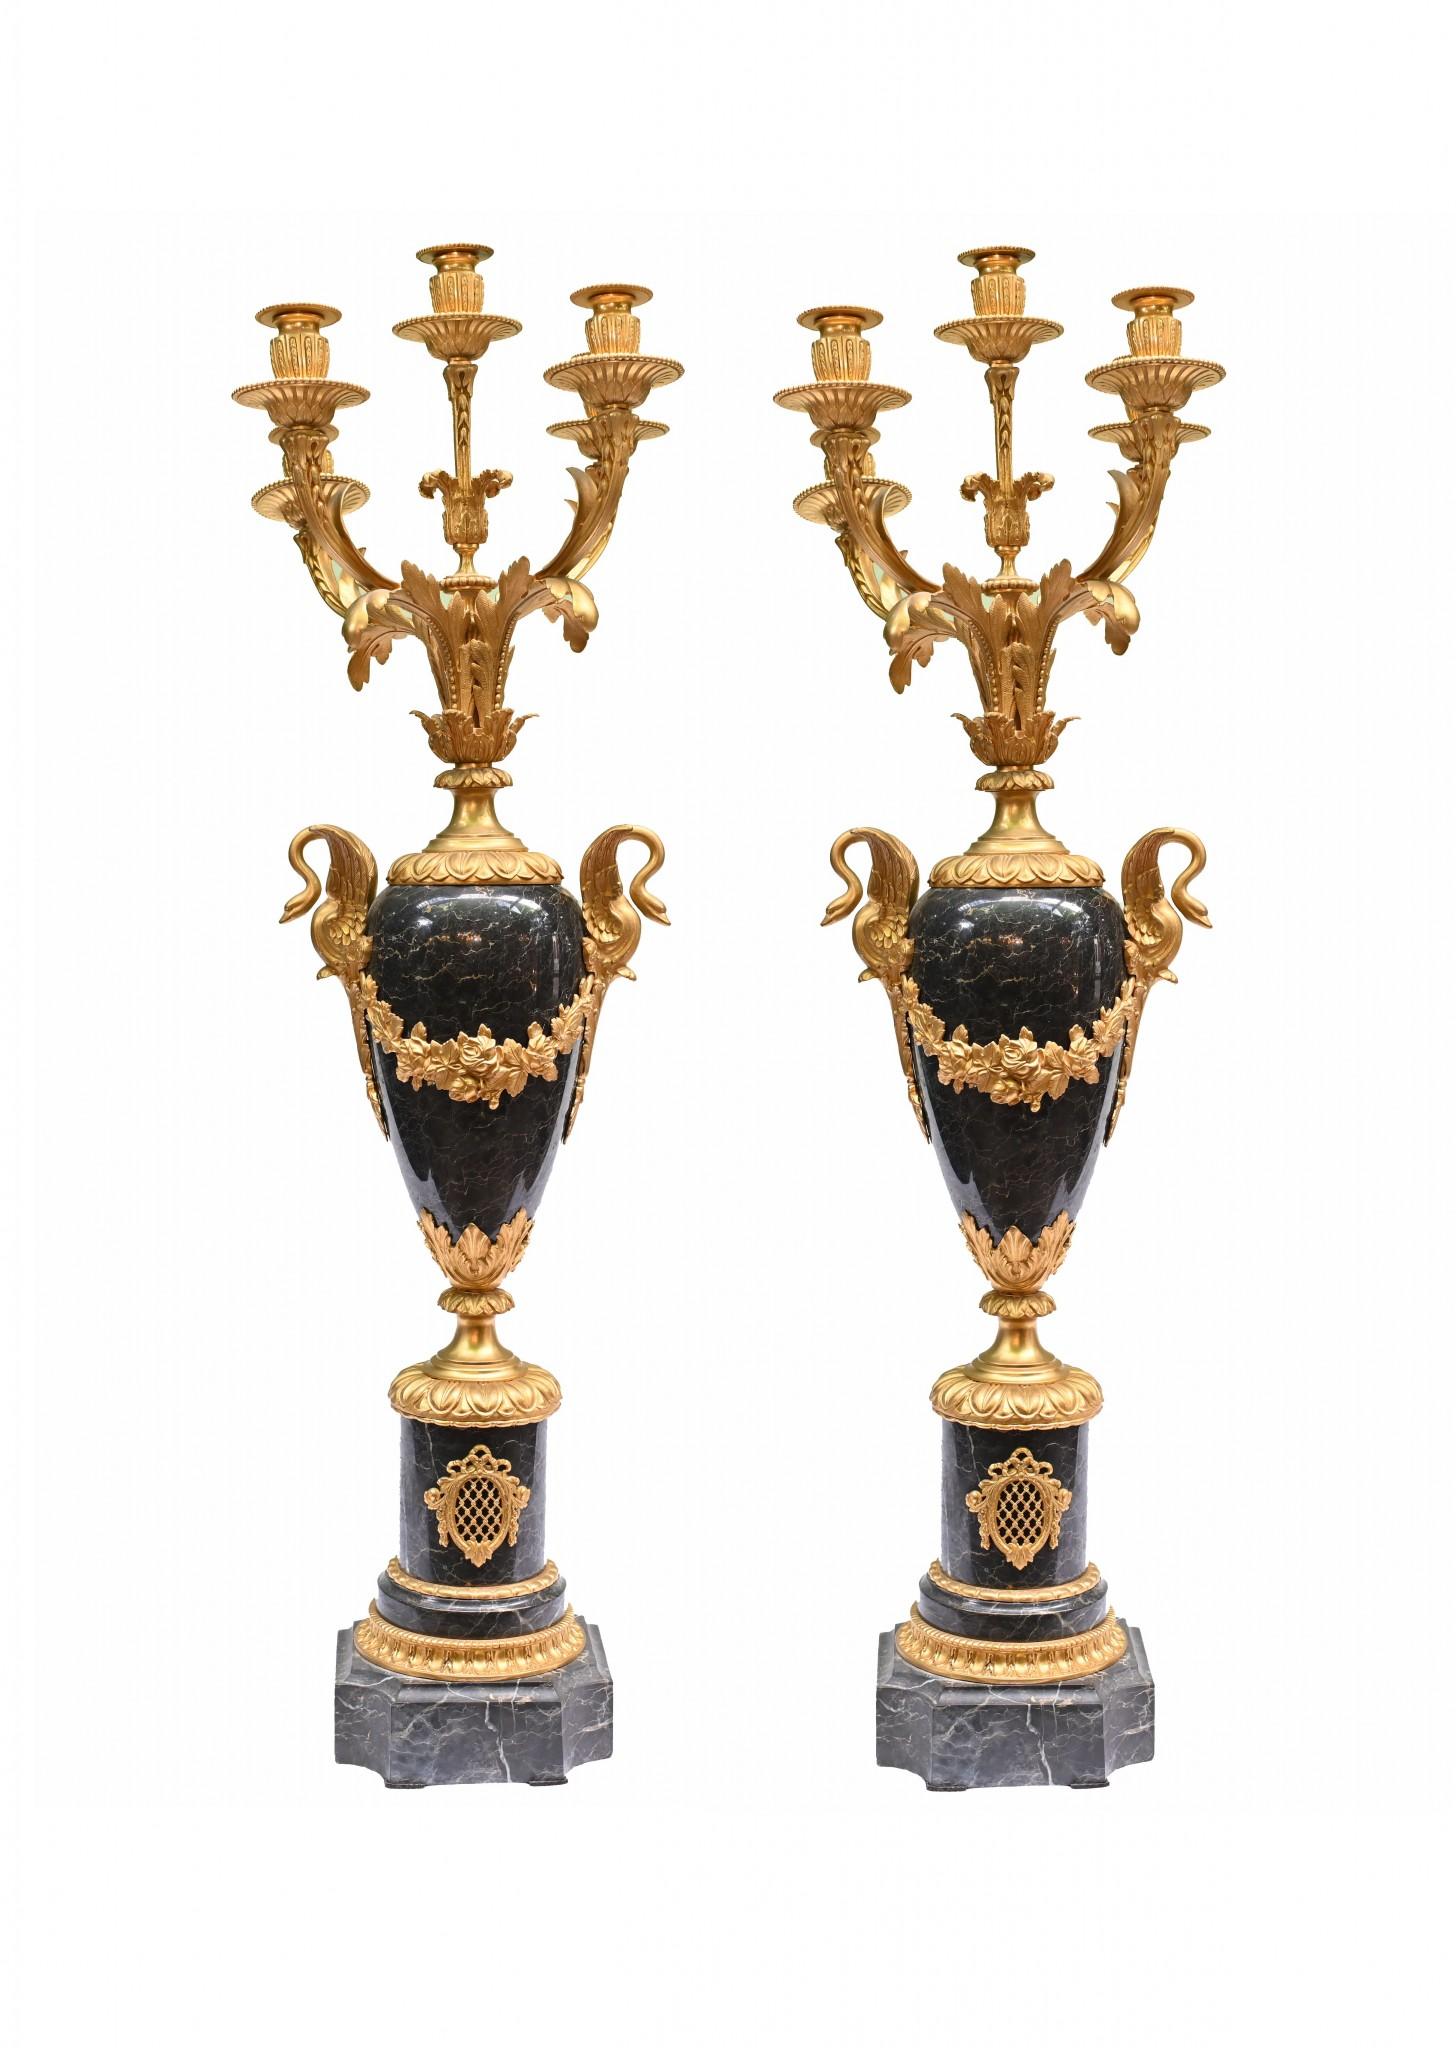 Pair of superb French Empire gilt and marble candelabras
The main urns are of amphora form with distinctive swan neck handles
The height to these is over three feet tall - 98 CM - so good size to them
The casting to the gilt is very detailed and